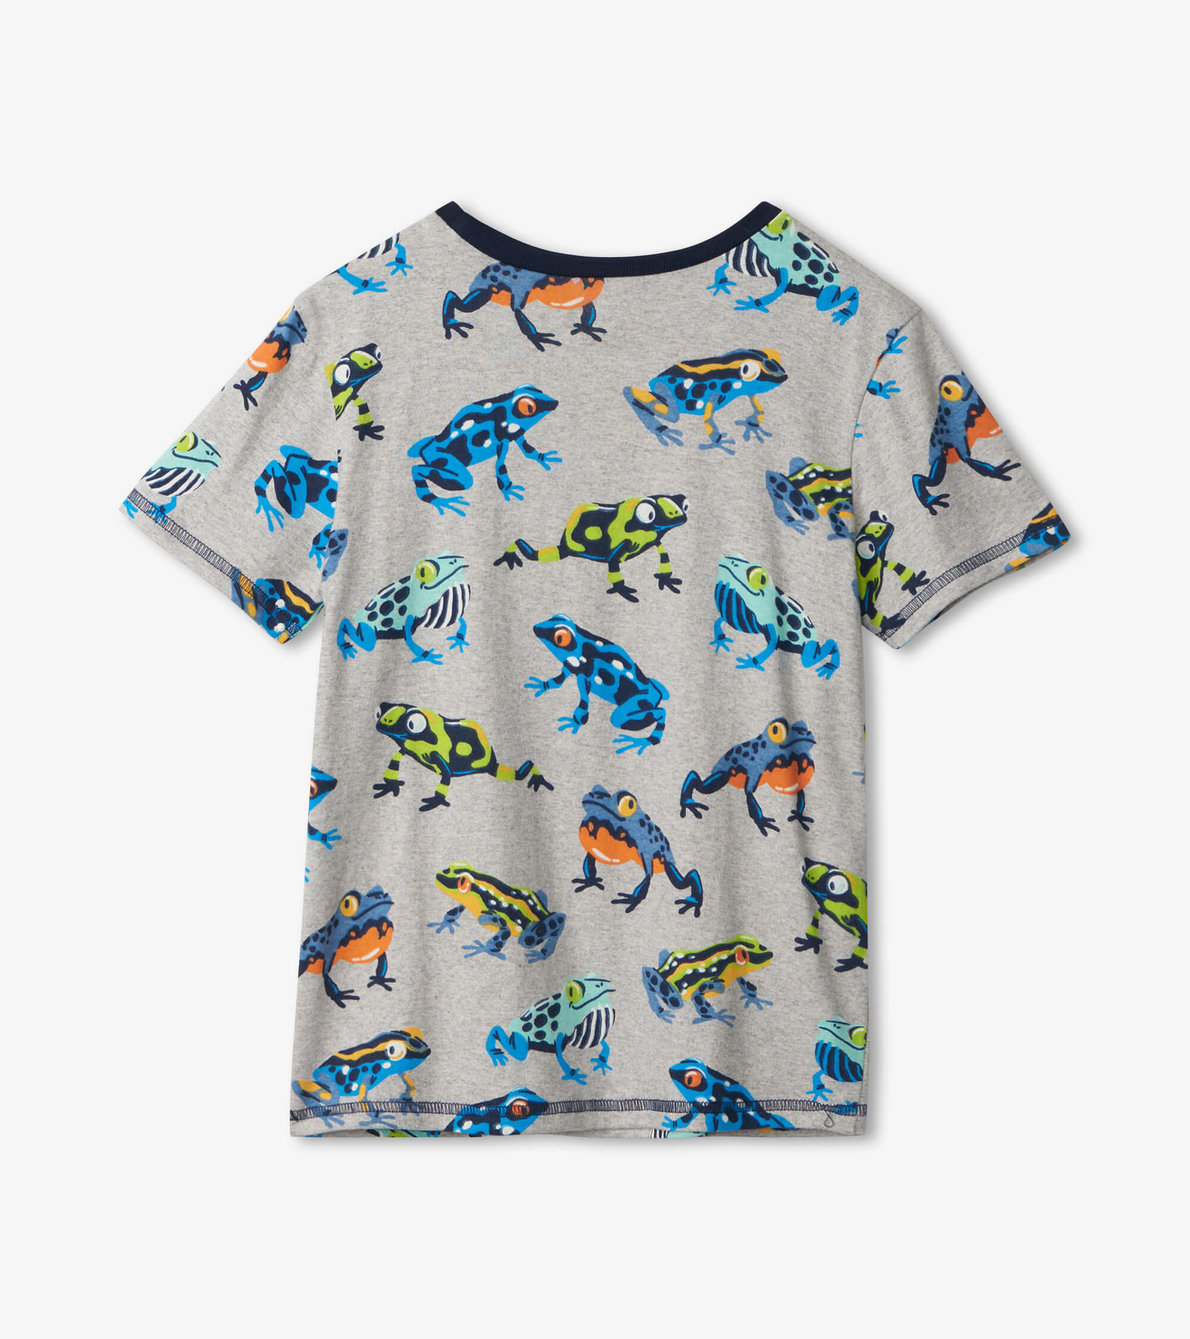 View larger image of Leaping Frogs Graphic Tee